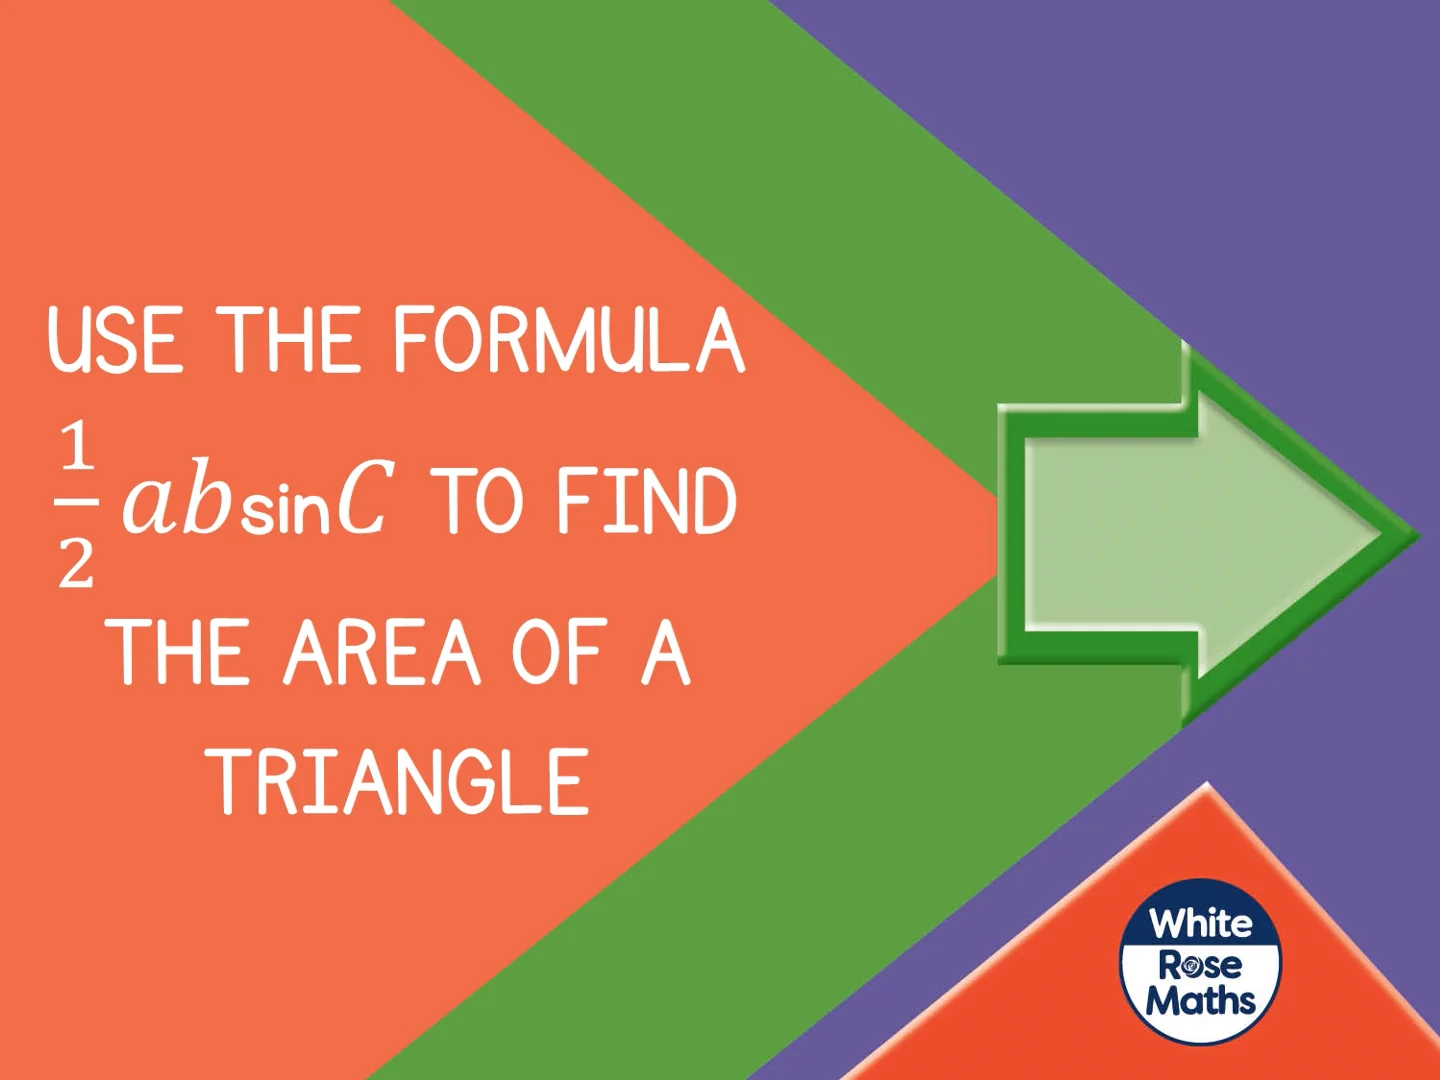 How to Find the Perimeter of a Triangle (Formula & Video)